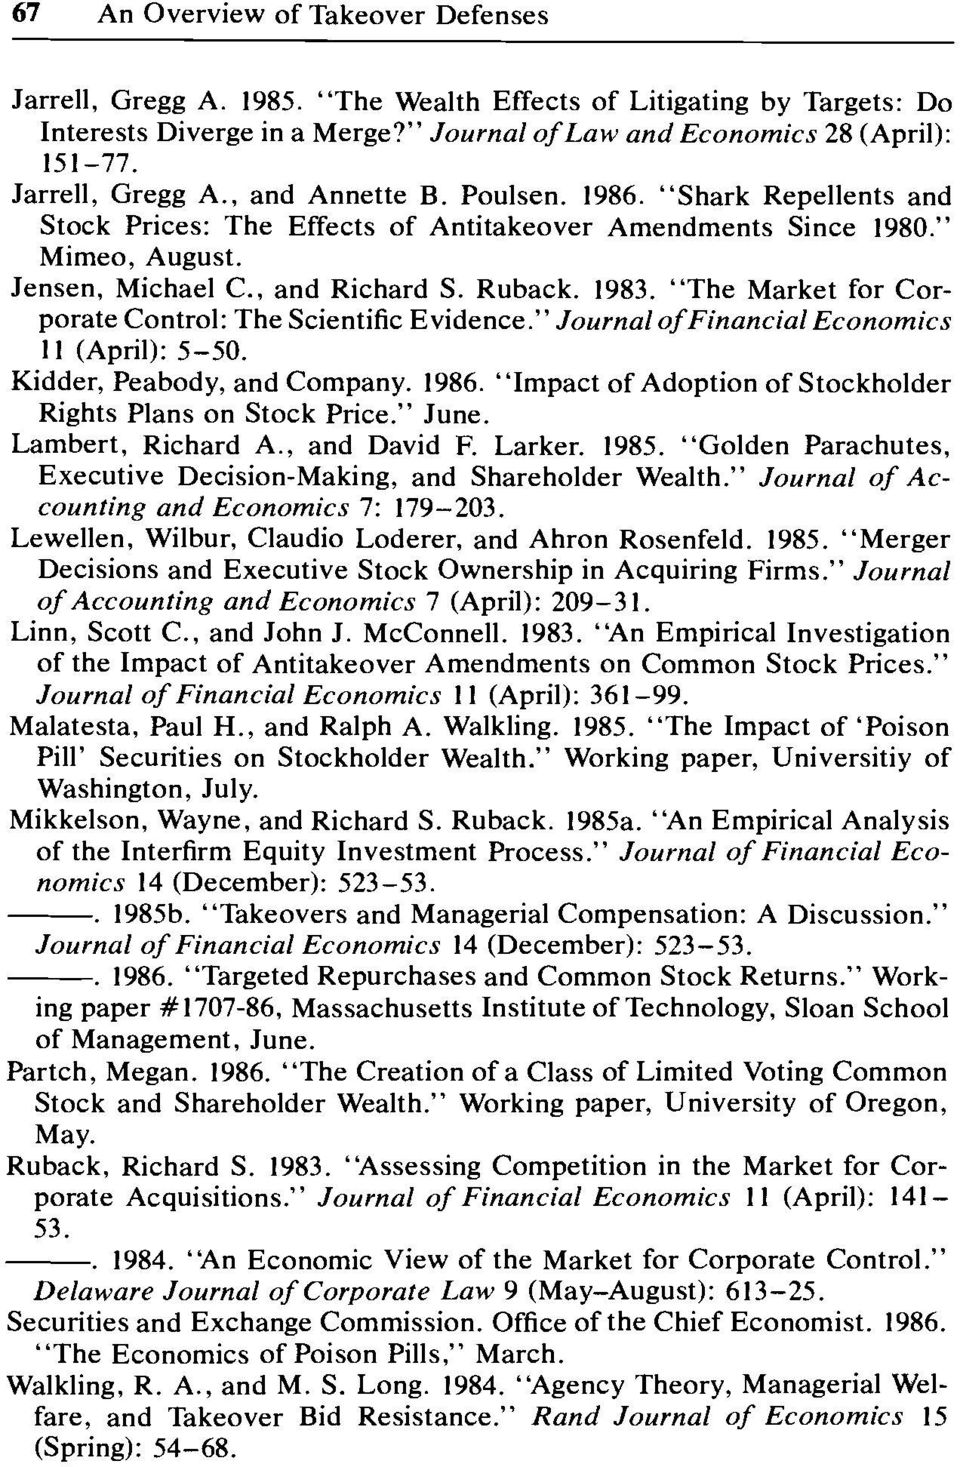 The Market for Corporate Control: The Scientific Evidence. Journal offinancia1 Economics 11 (April): 5-50. Kidder, Peabody, and Company. 1986.